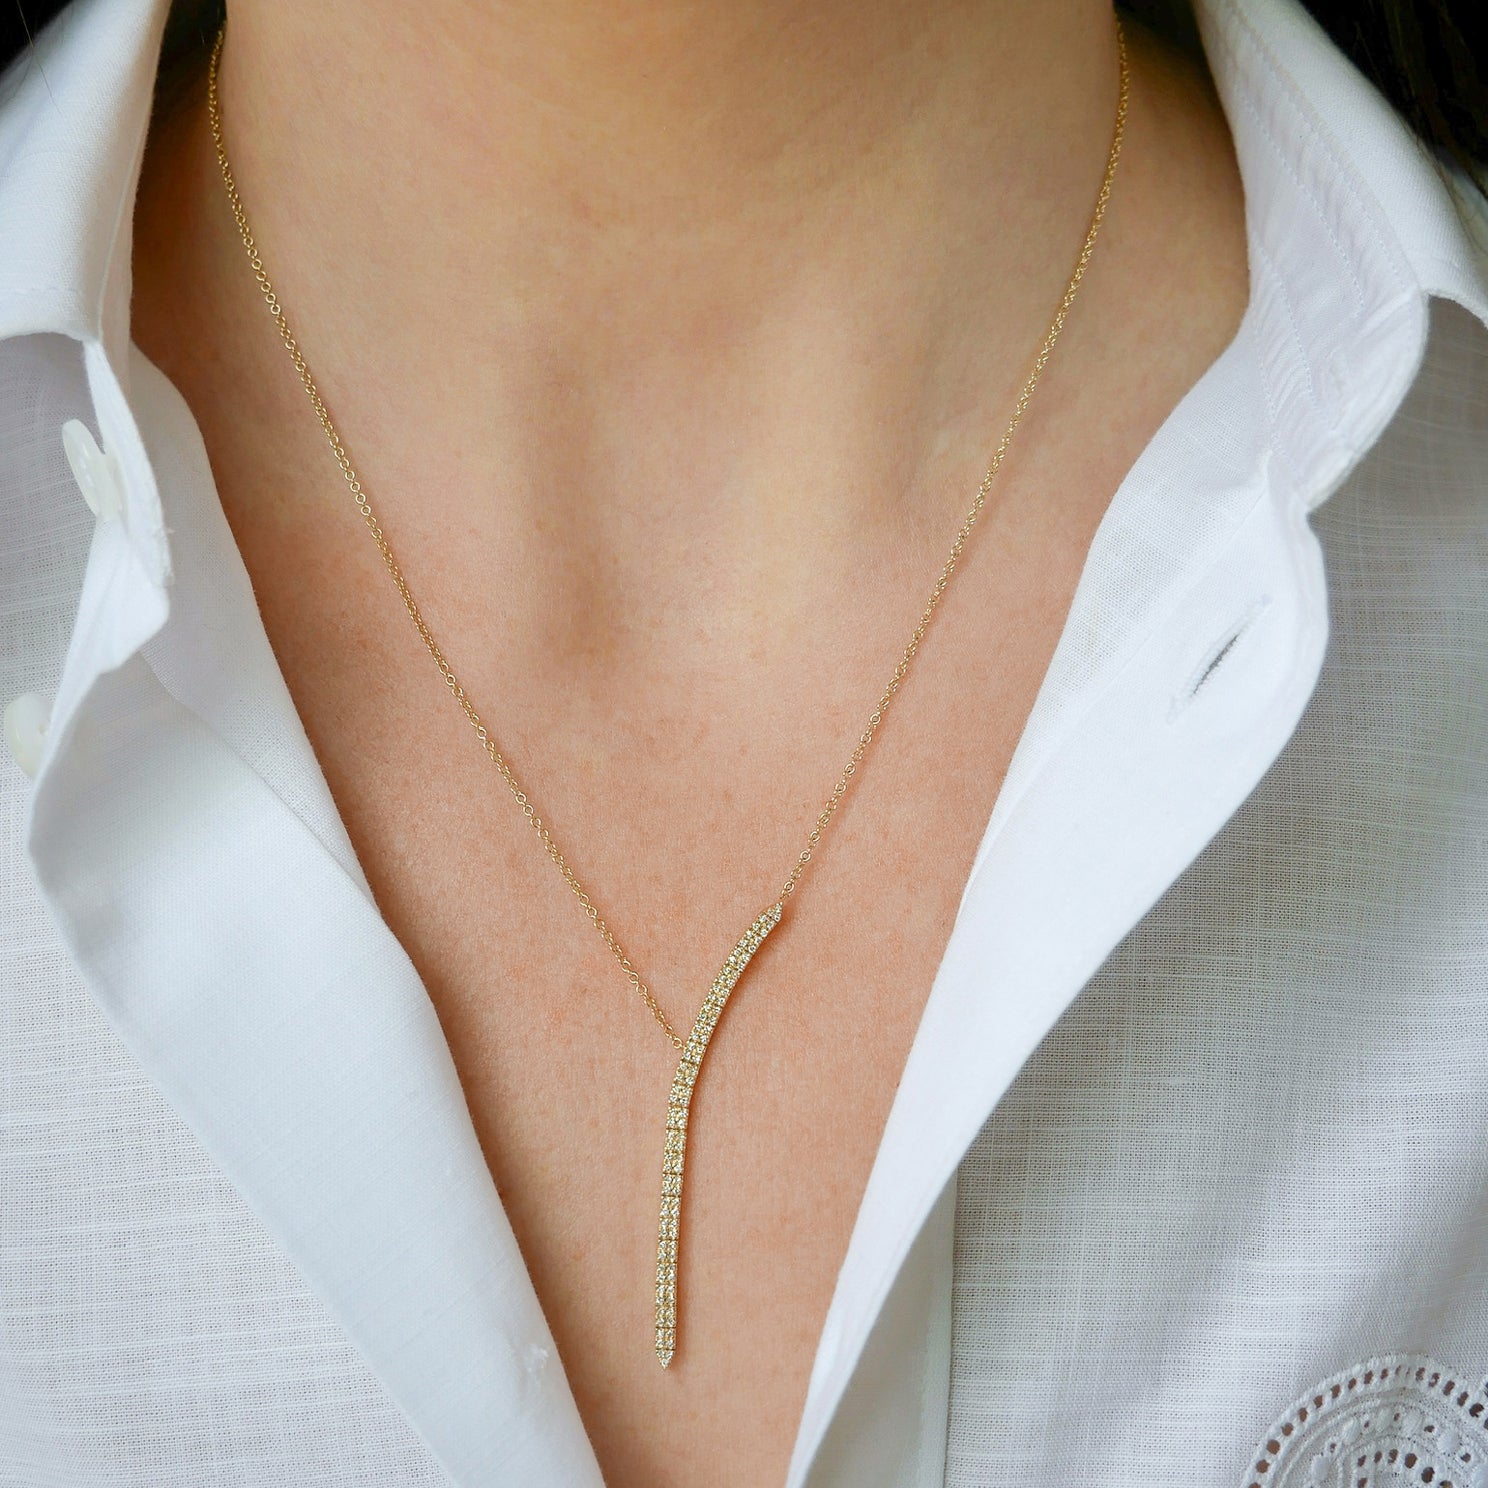 Diamond Double Row Waterfall Necklace in 14k yellow gold styled on neck of model with white button down blouse